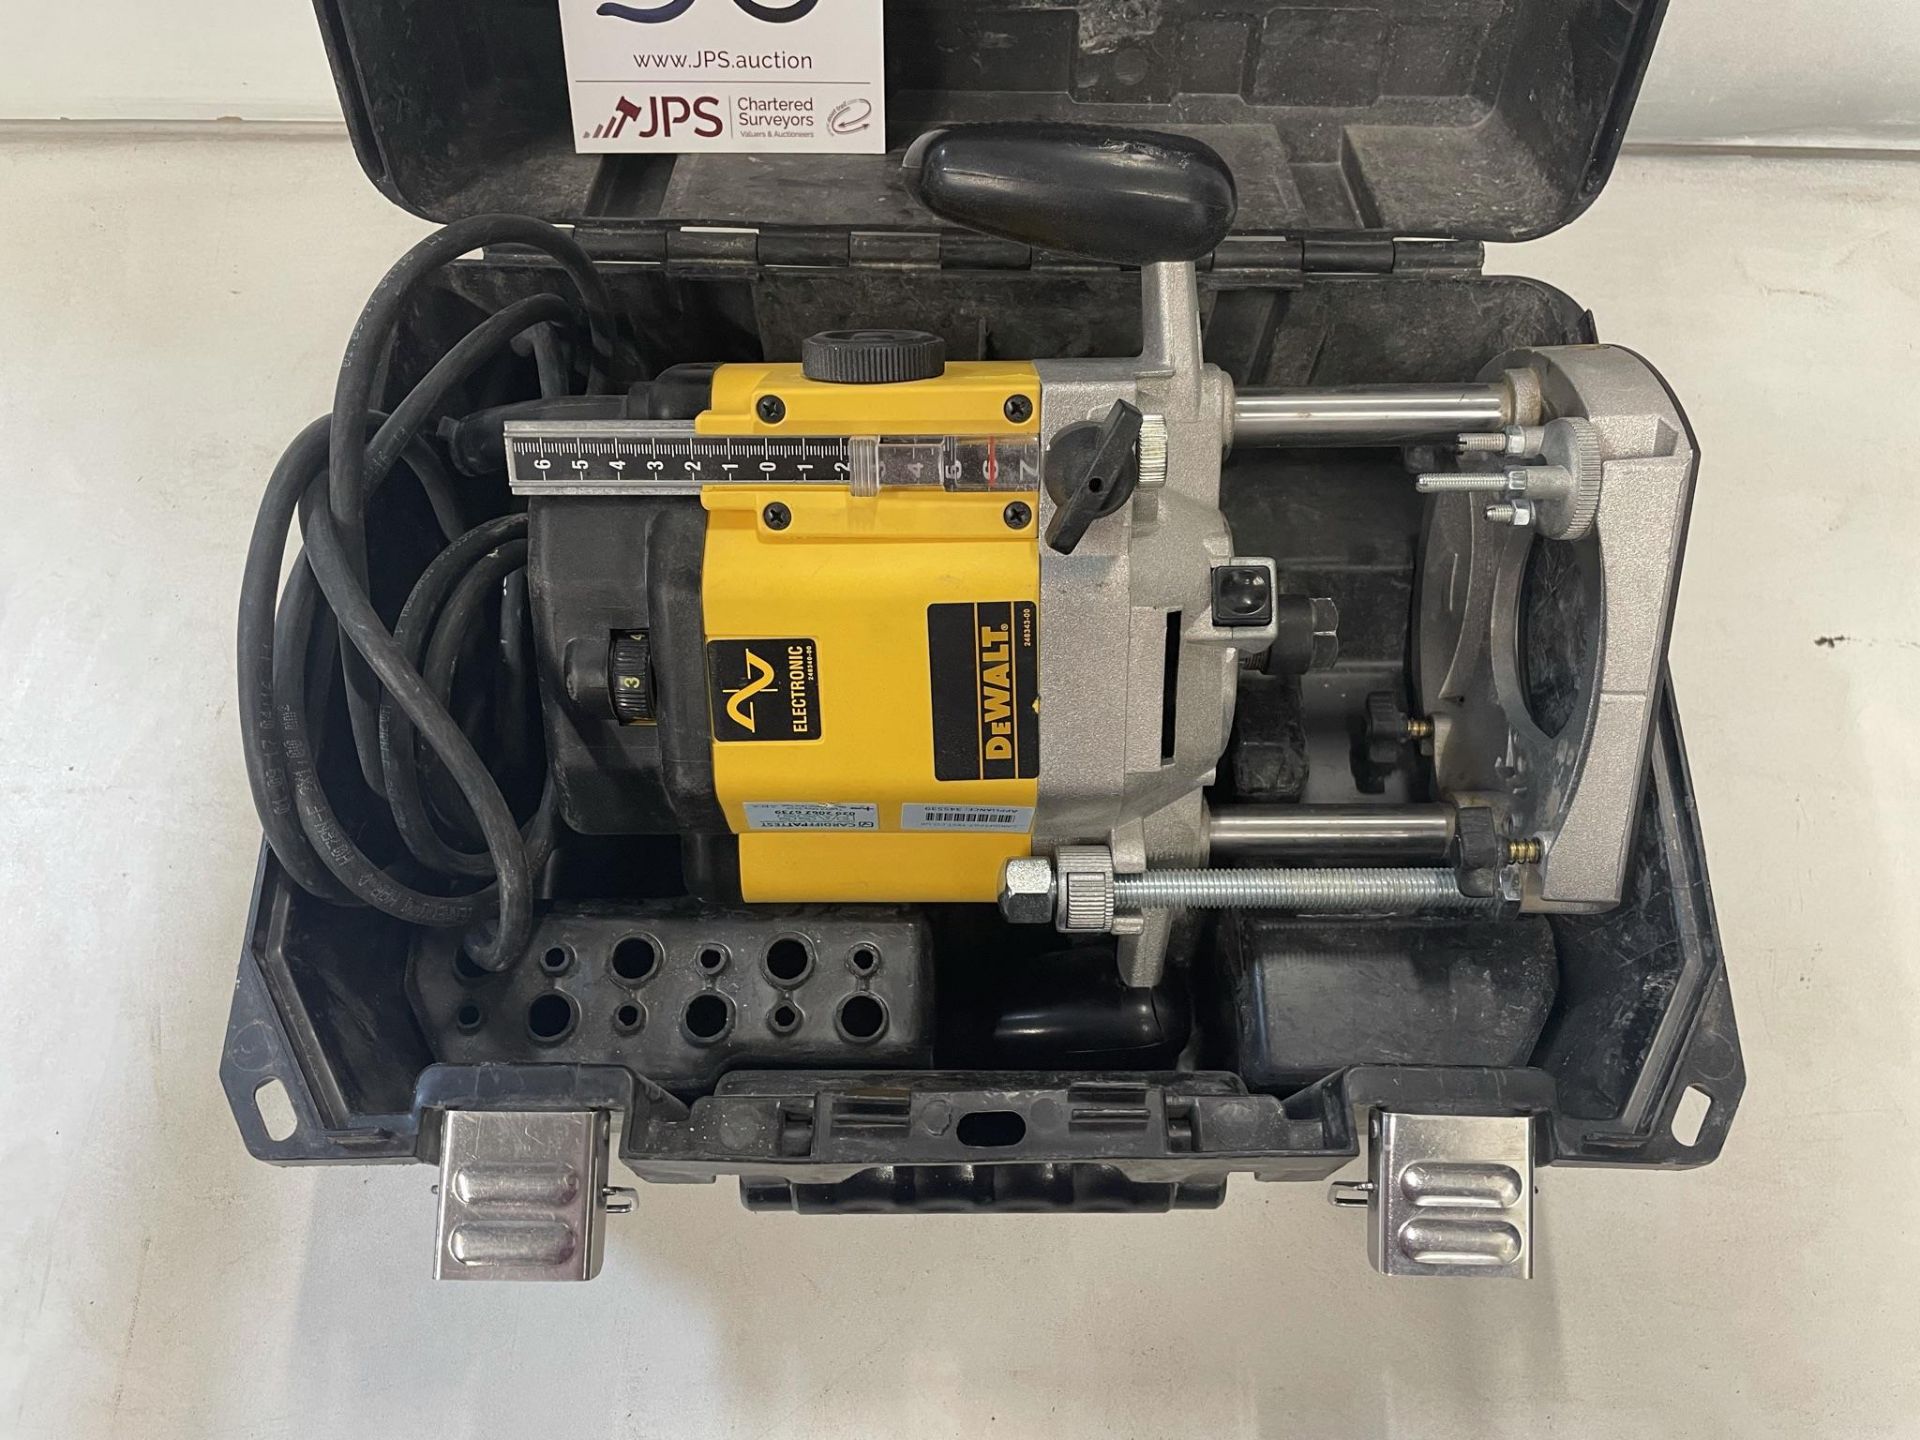 Dewalt DW625E Variable Speed Router in Case - Image 2 of 4